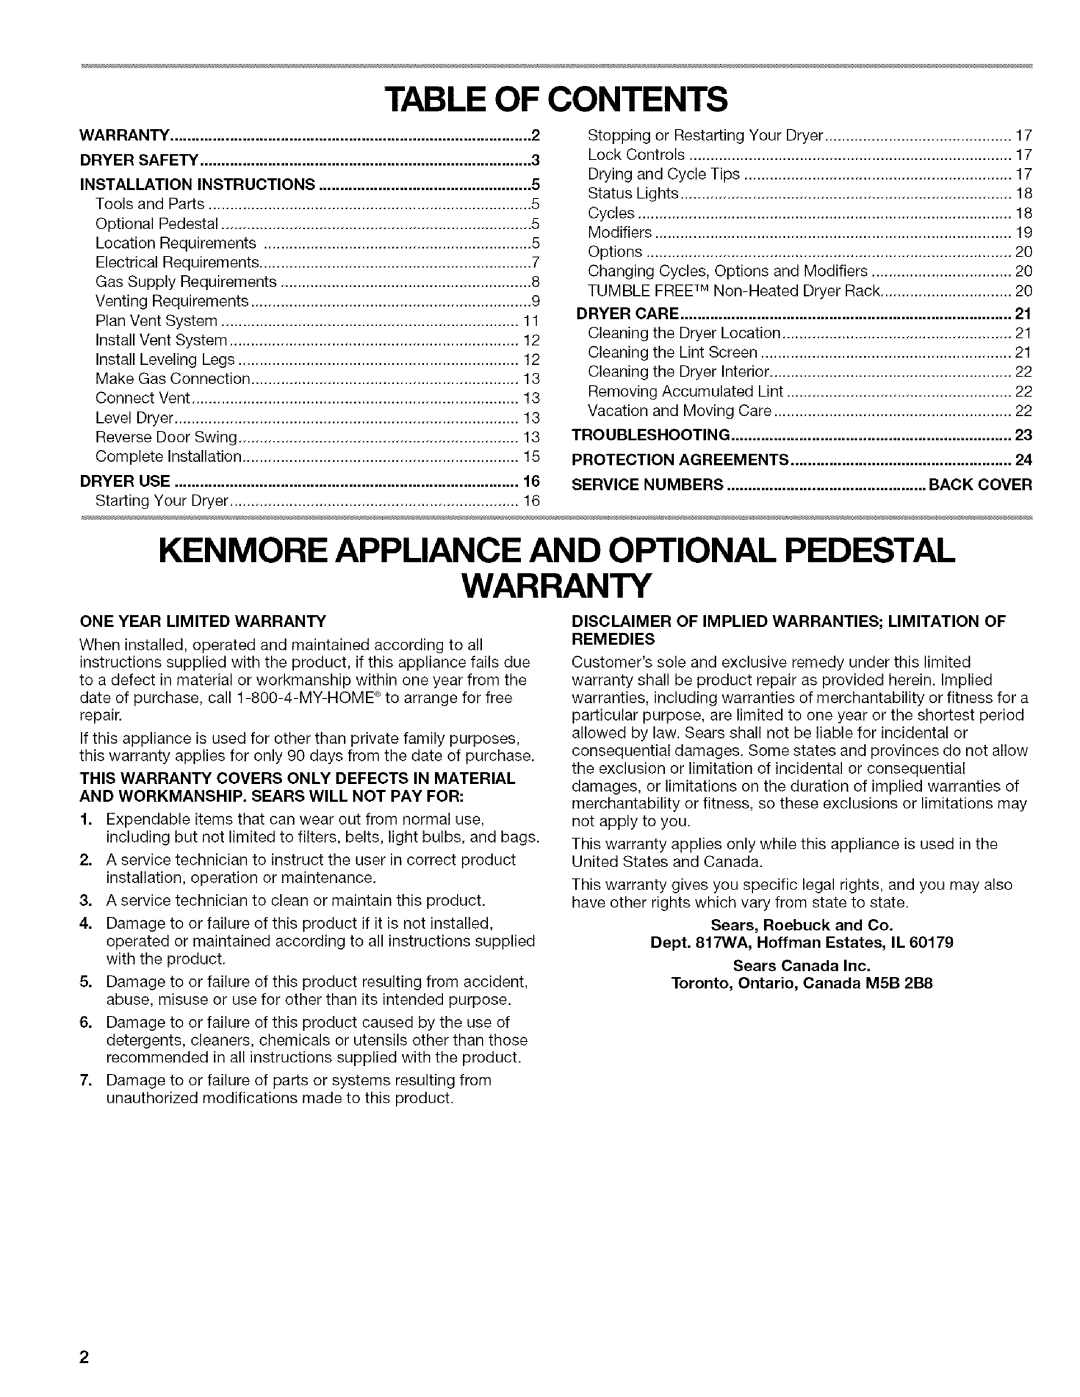 Kenmore 110.9756, 9757 Table Of Contents, Kenmore Appliance And Optional Pedestal Warranty, Dryer Safety, Installation 